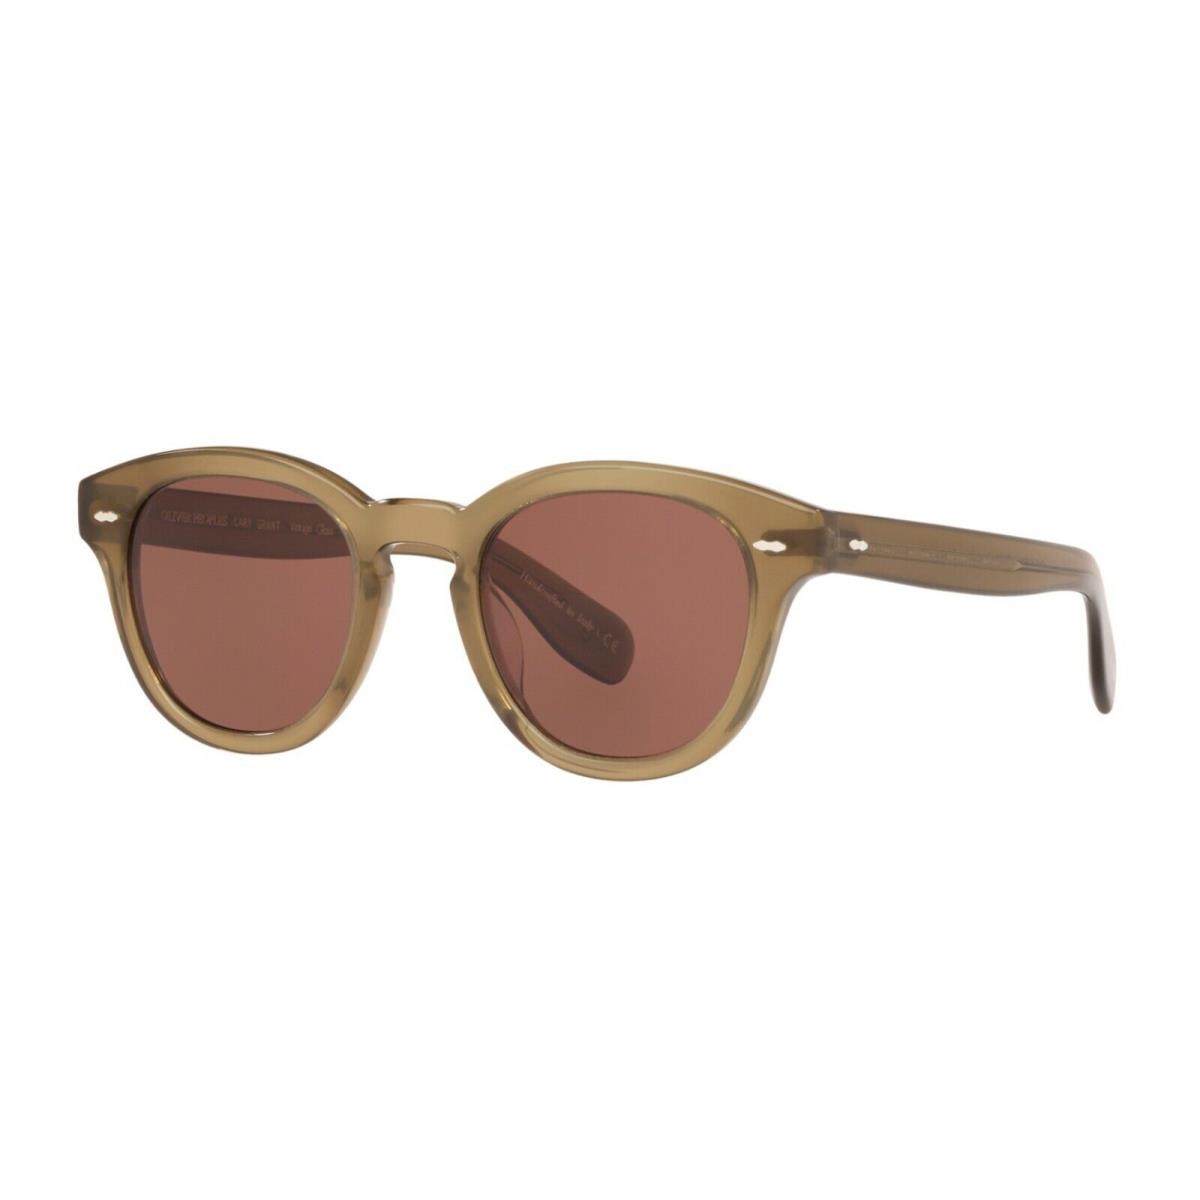 Oliver Peoples Cary Grant Sun OV 5413SU Dusty Olive/rosewood 1678C5 Sunglasses